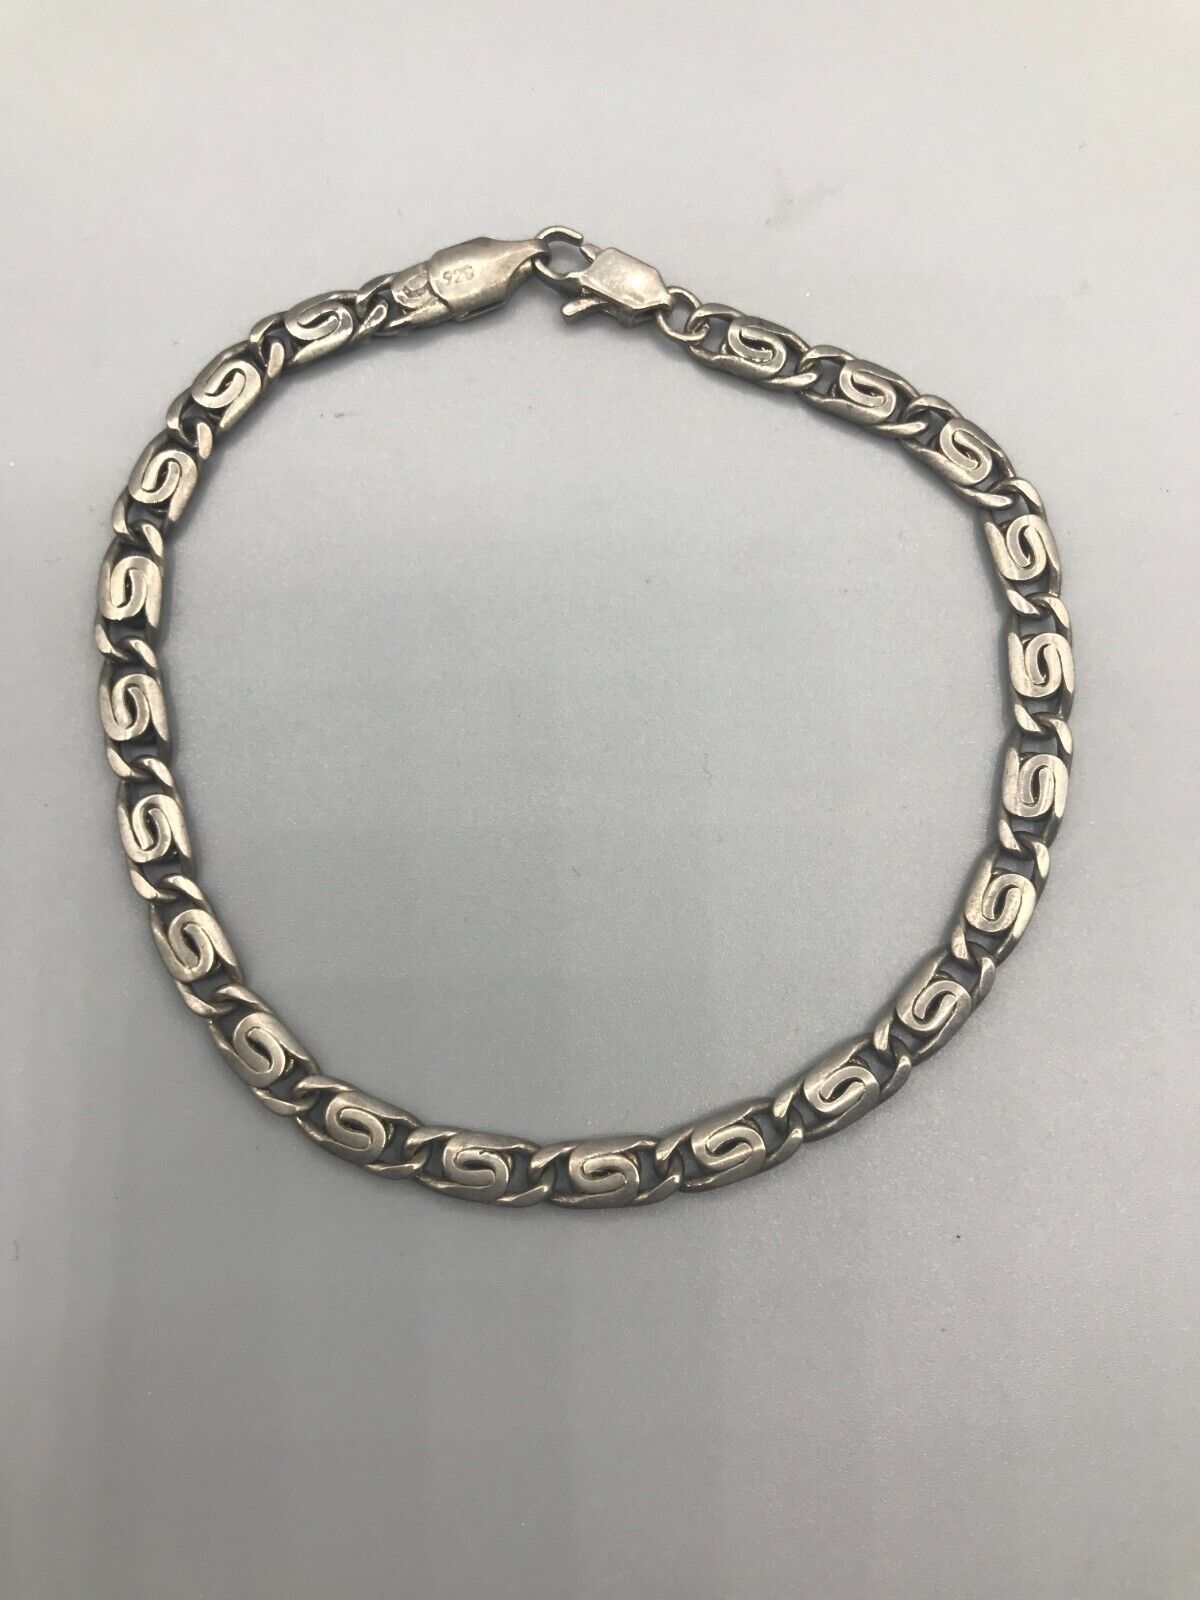 EP12   SILVER CHAIN / BRACELET / GREAT CONDITION!